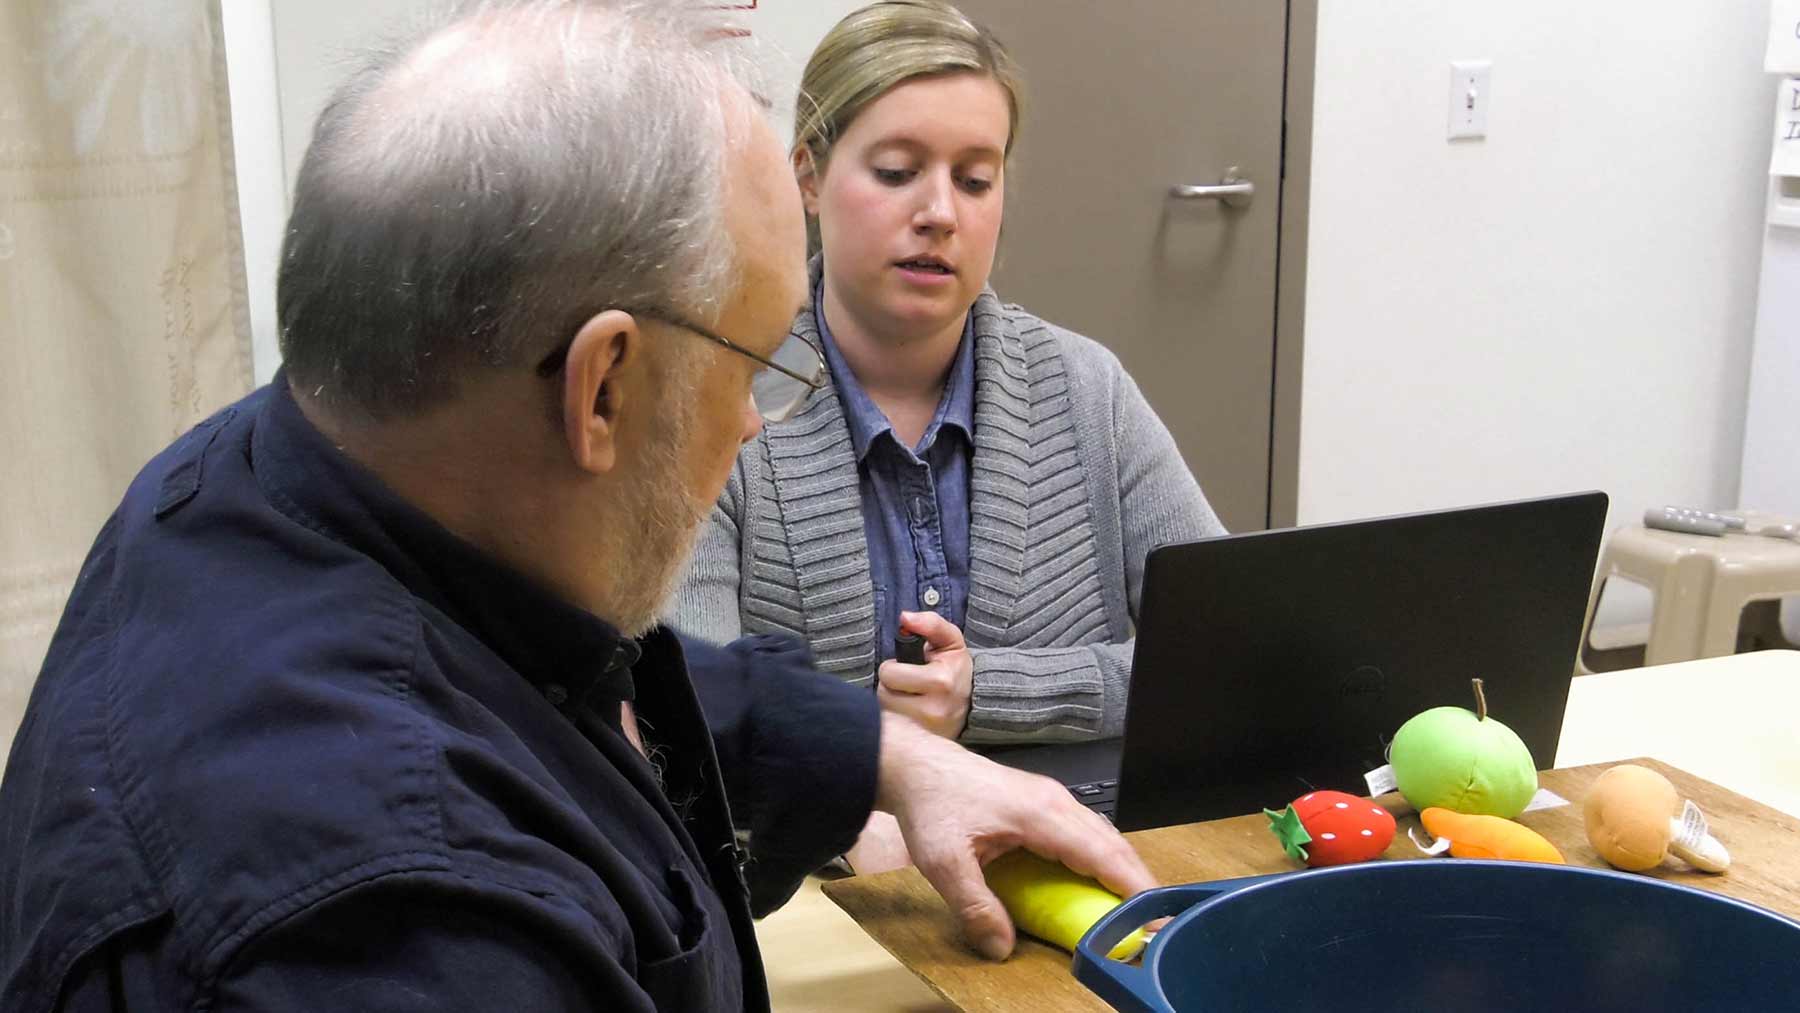 Patient Ken Meeks works with his therapist as part of a clinical trial studying the Vivistim vagus nerve stimulation device for stroke rehab